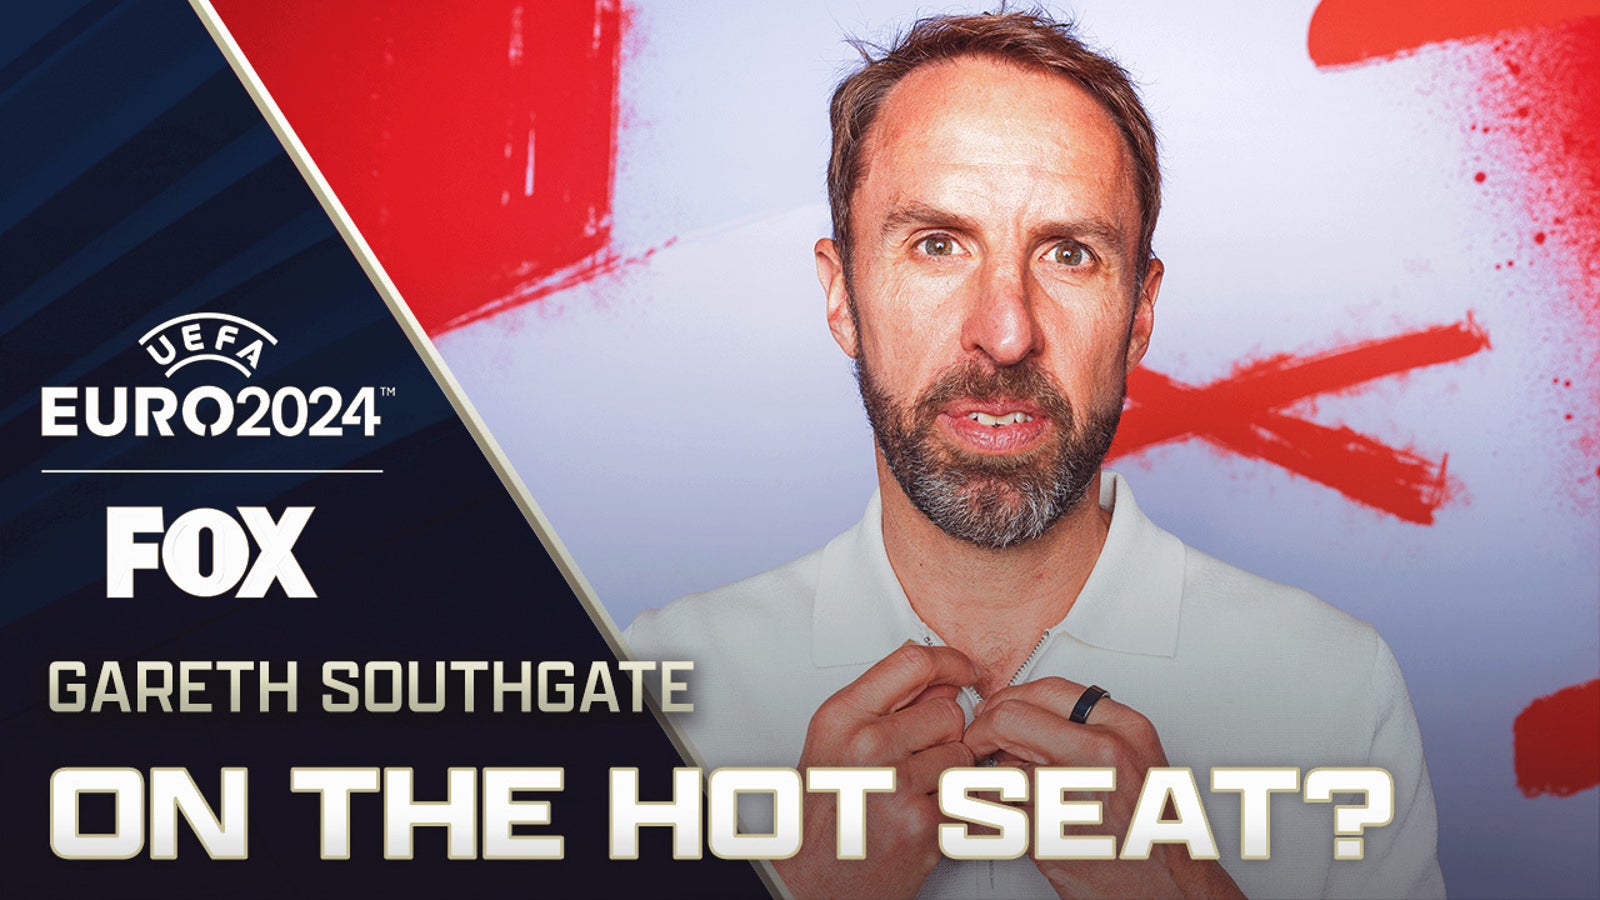 Gareth Southgate's job on the line if England finishes poorly?